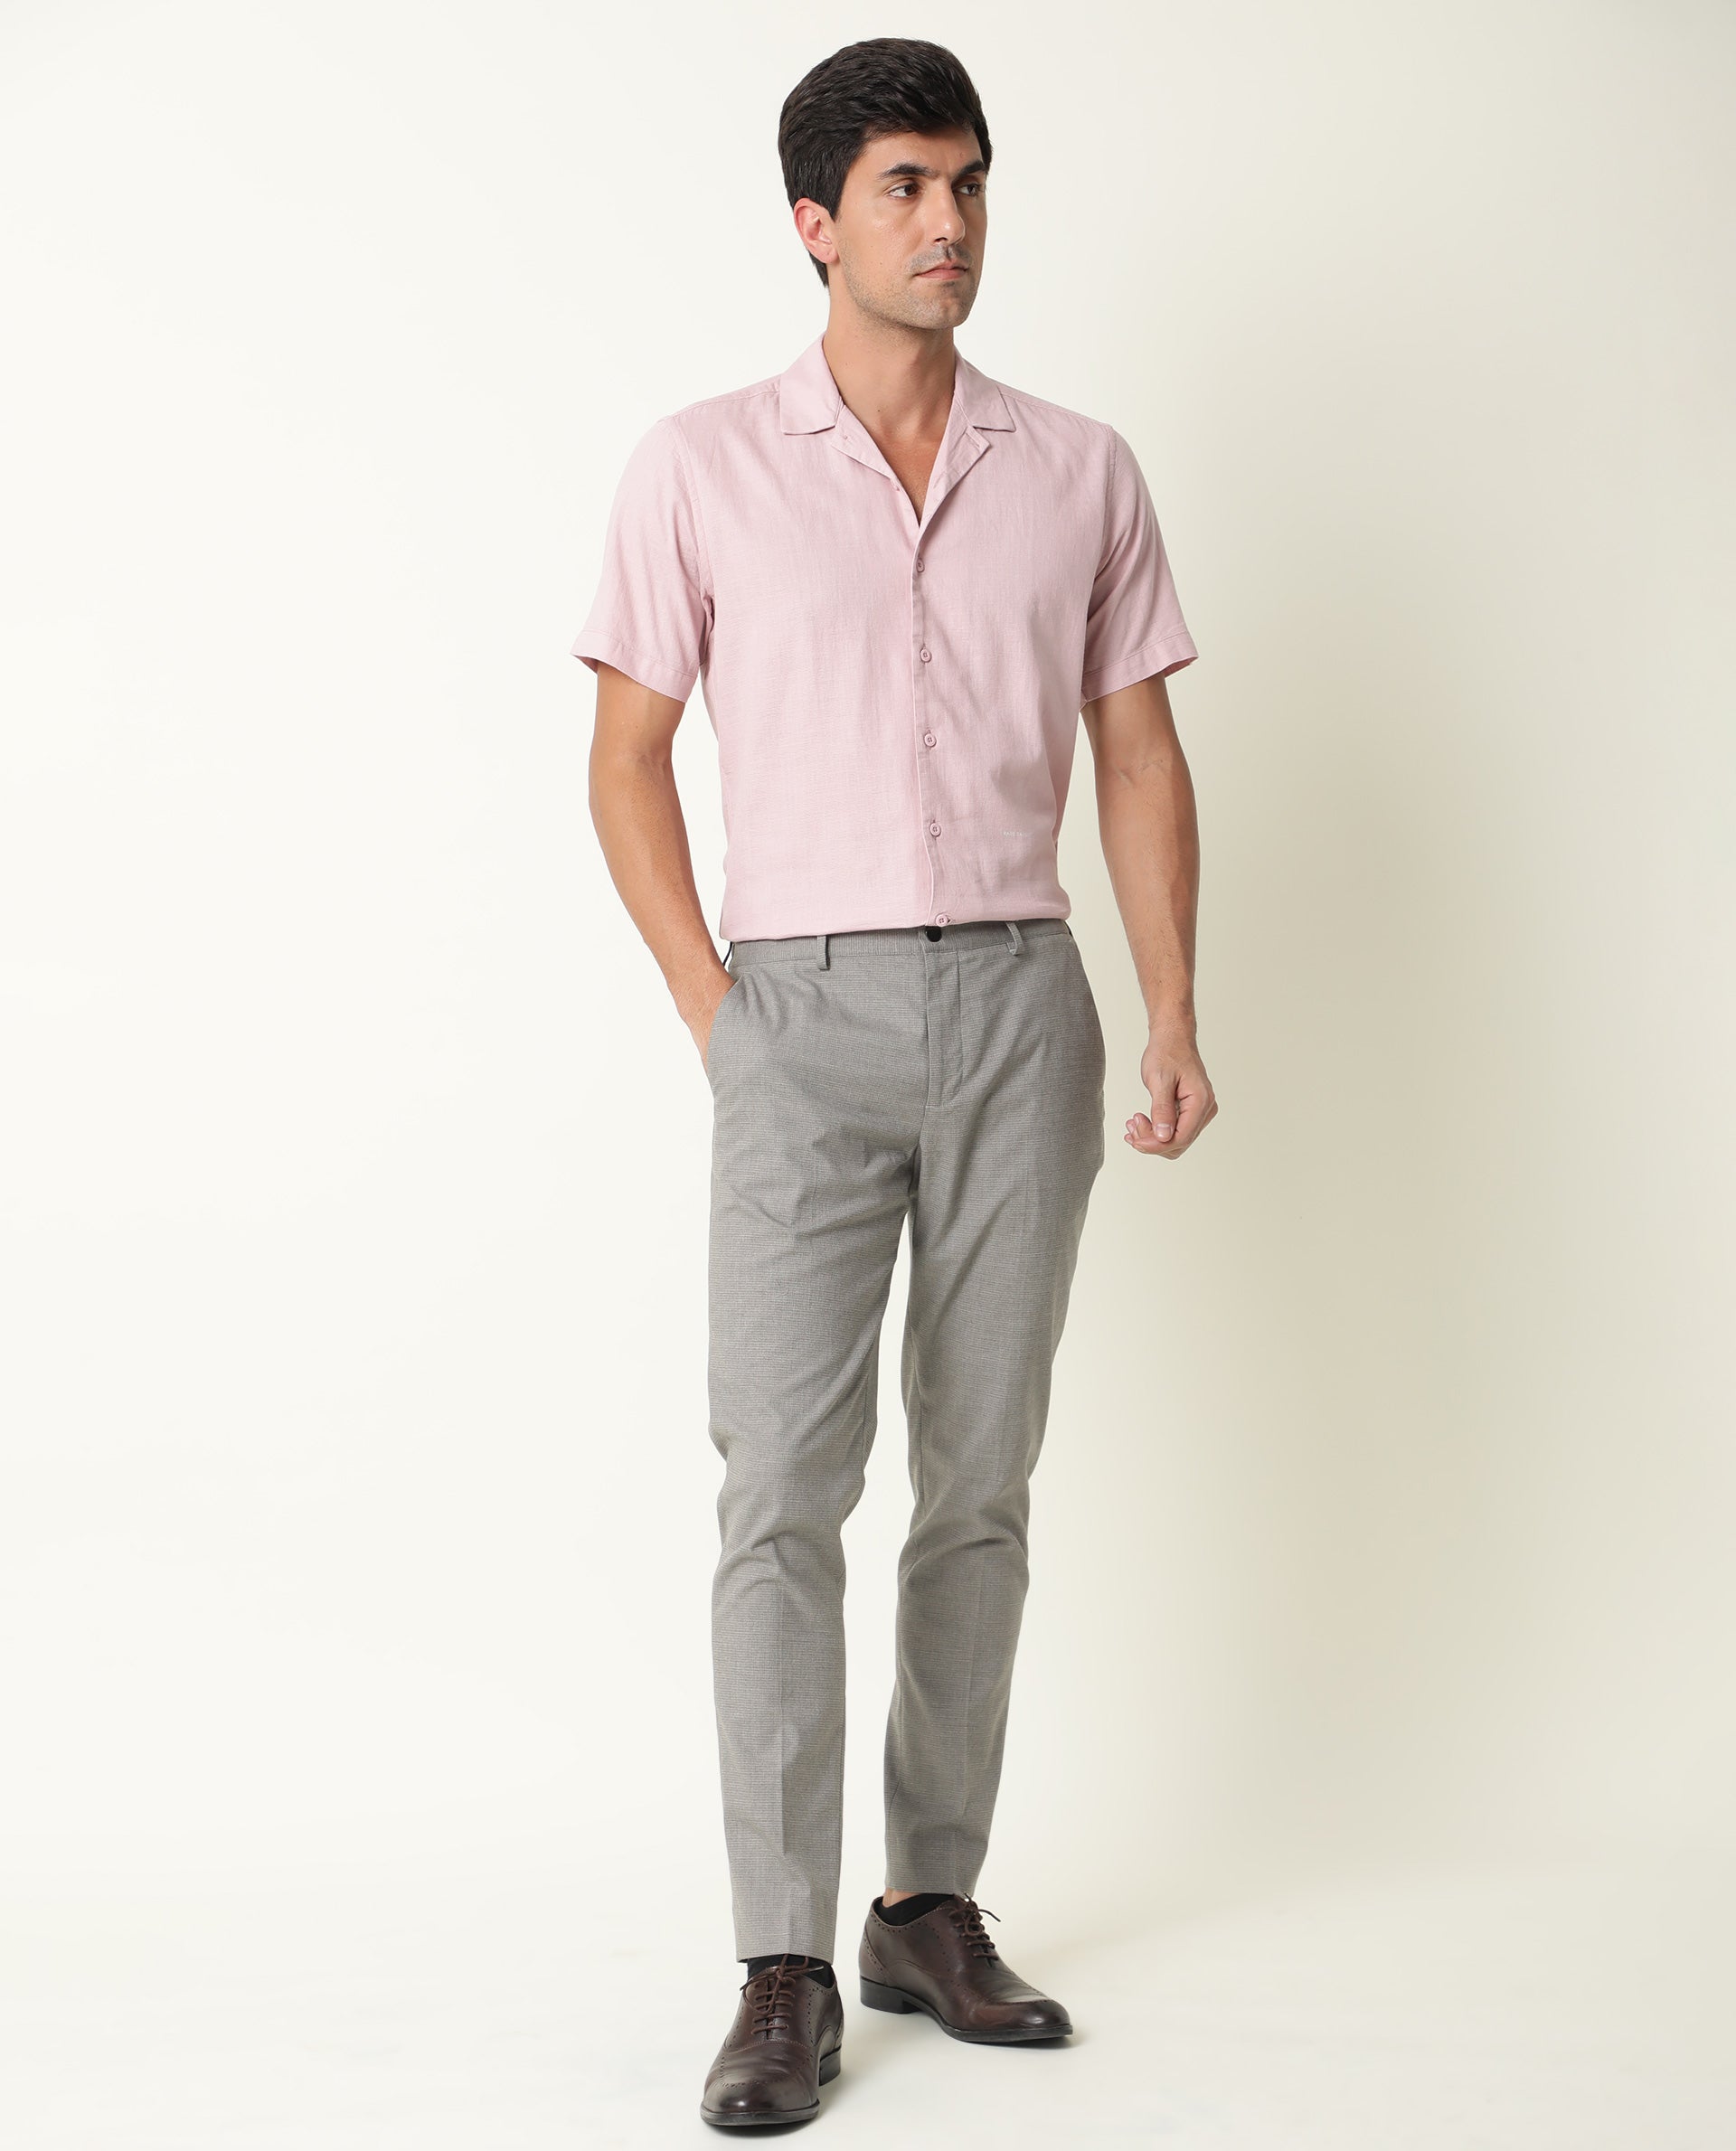 Grey Vertical Striped Dress Pants with Pink Shirt Dressy Outfits For Men (2  ideas & outfits) | Lookastic